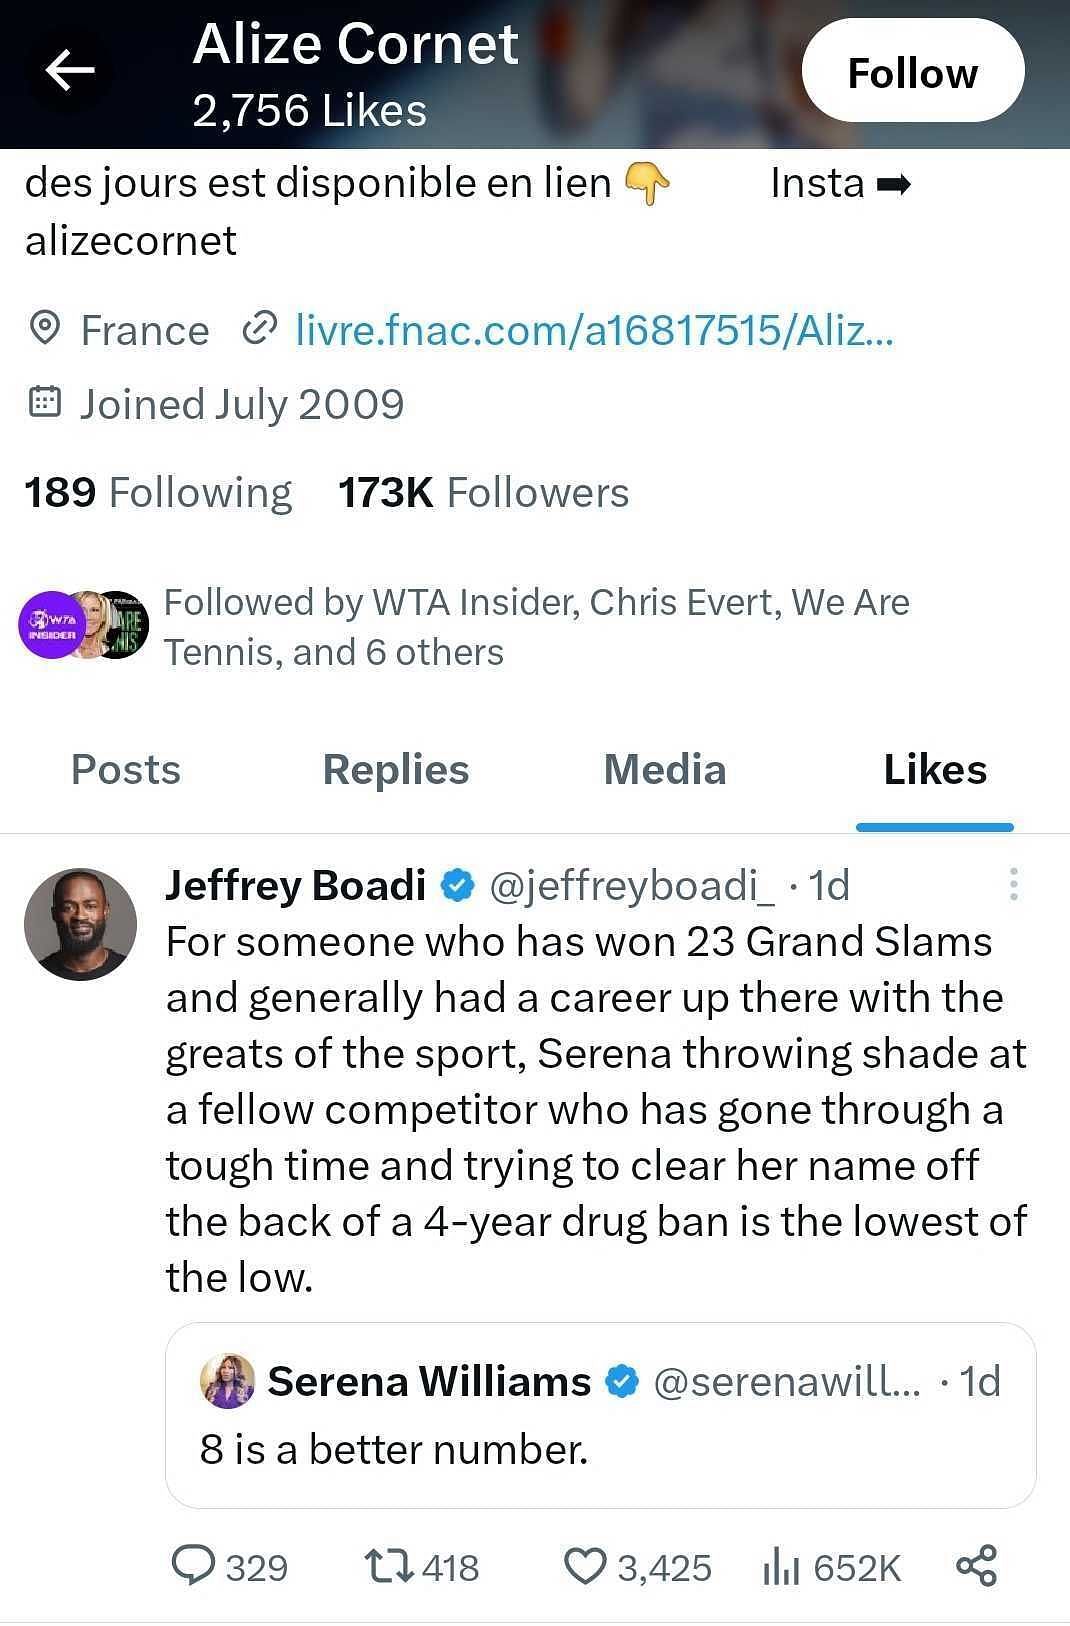 Alize Cornet likes a user&#039;s comment criticizing Williams&#039; lack of support for Simona Halep